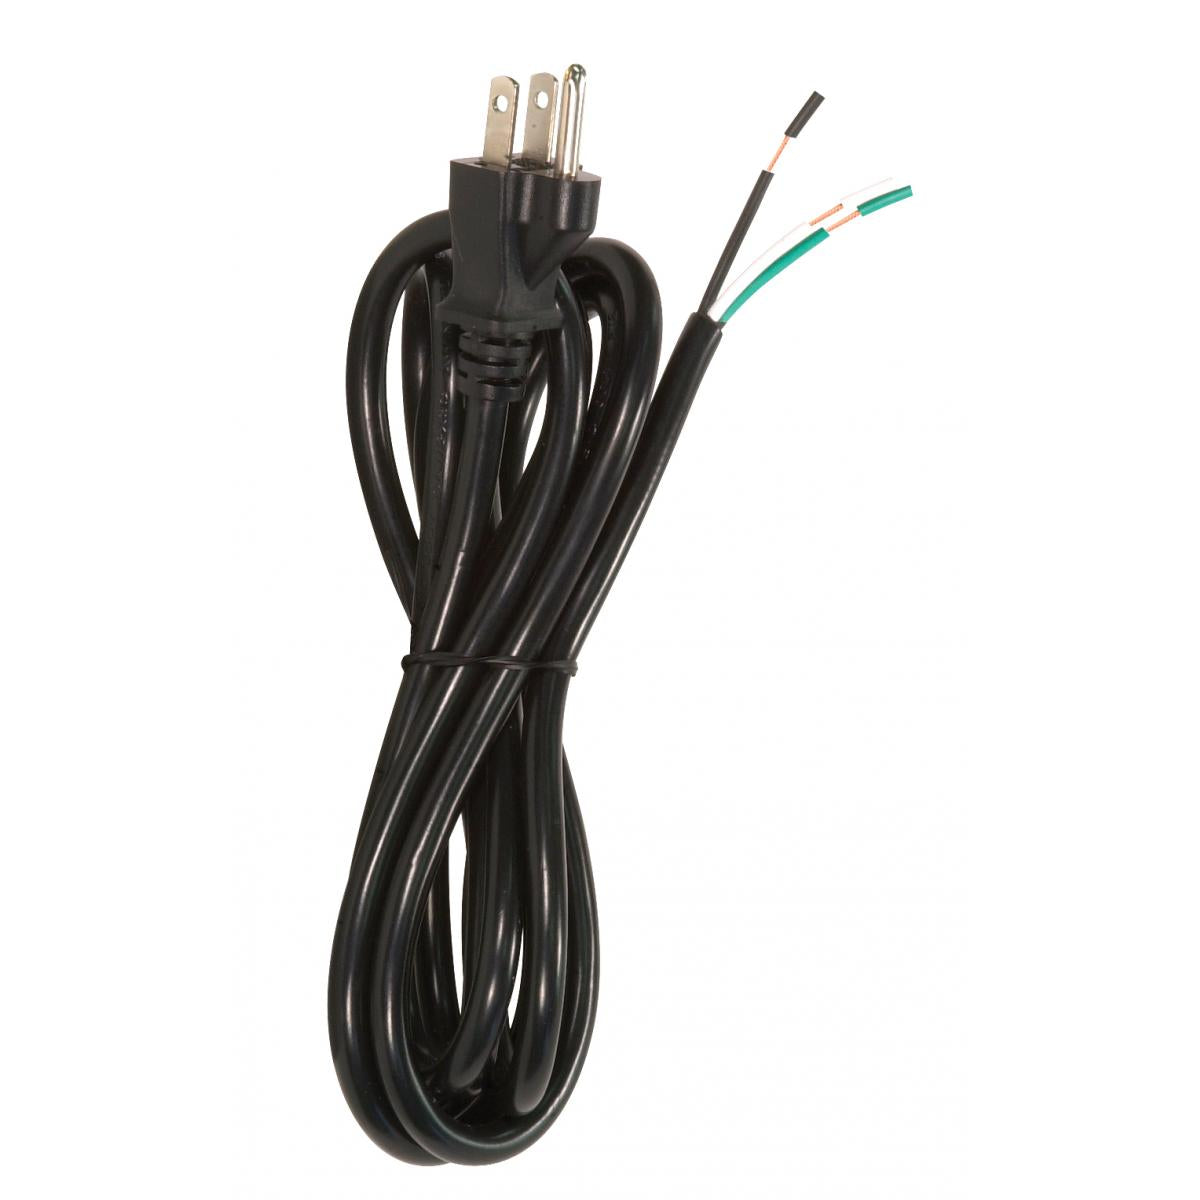 Satco 90-2209 8 Foot 18/3 SJT 105C Heavy Duty Cord Set Black Finish 50 Carton 3 Prong Molded Plug Stripped And Slit